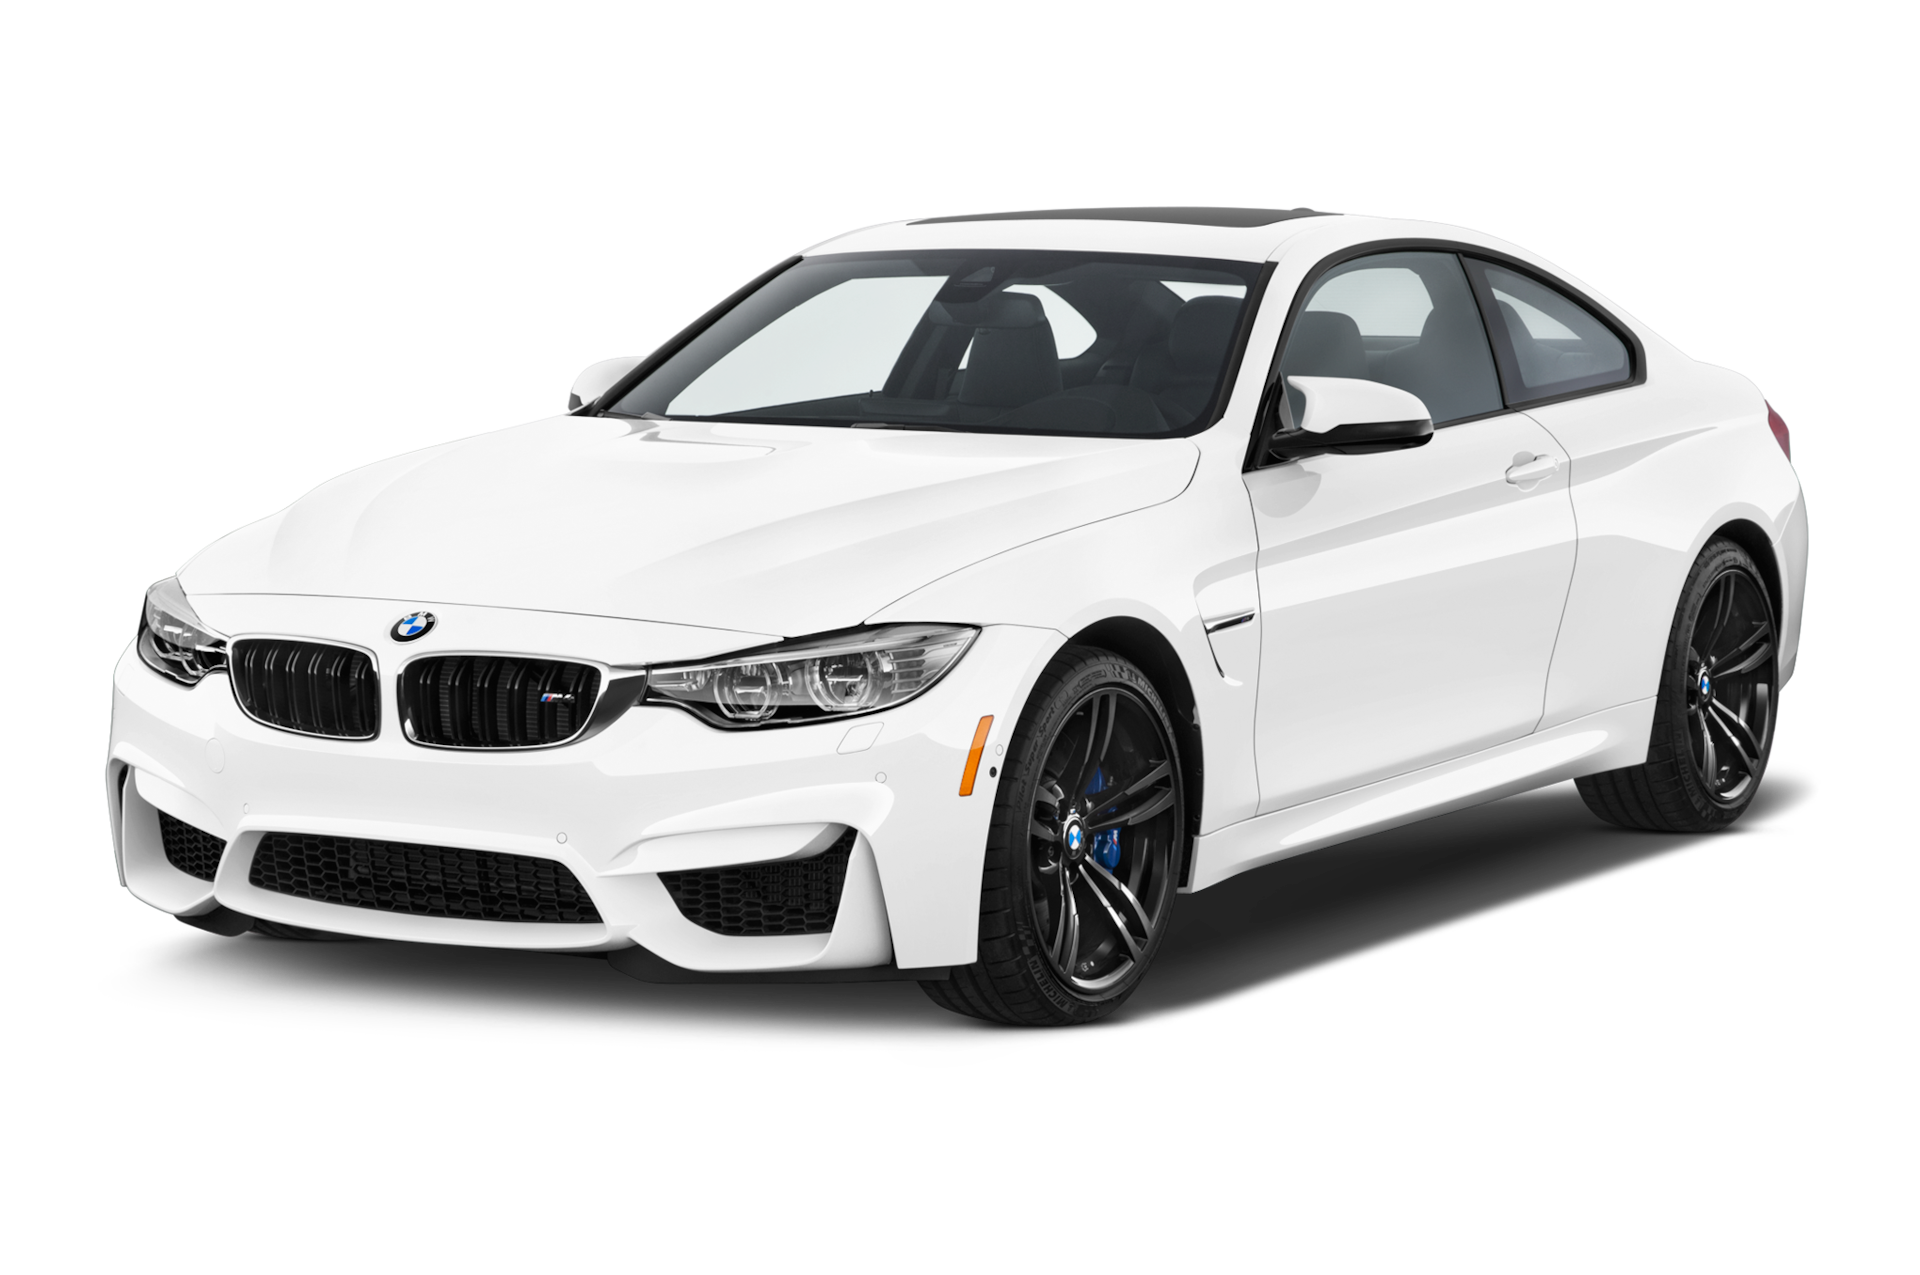 2015 BMW M4 Prices, Reviews, and Photos - MotorTrend